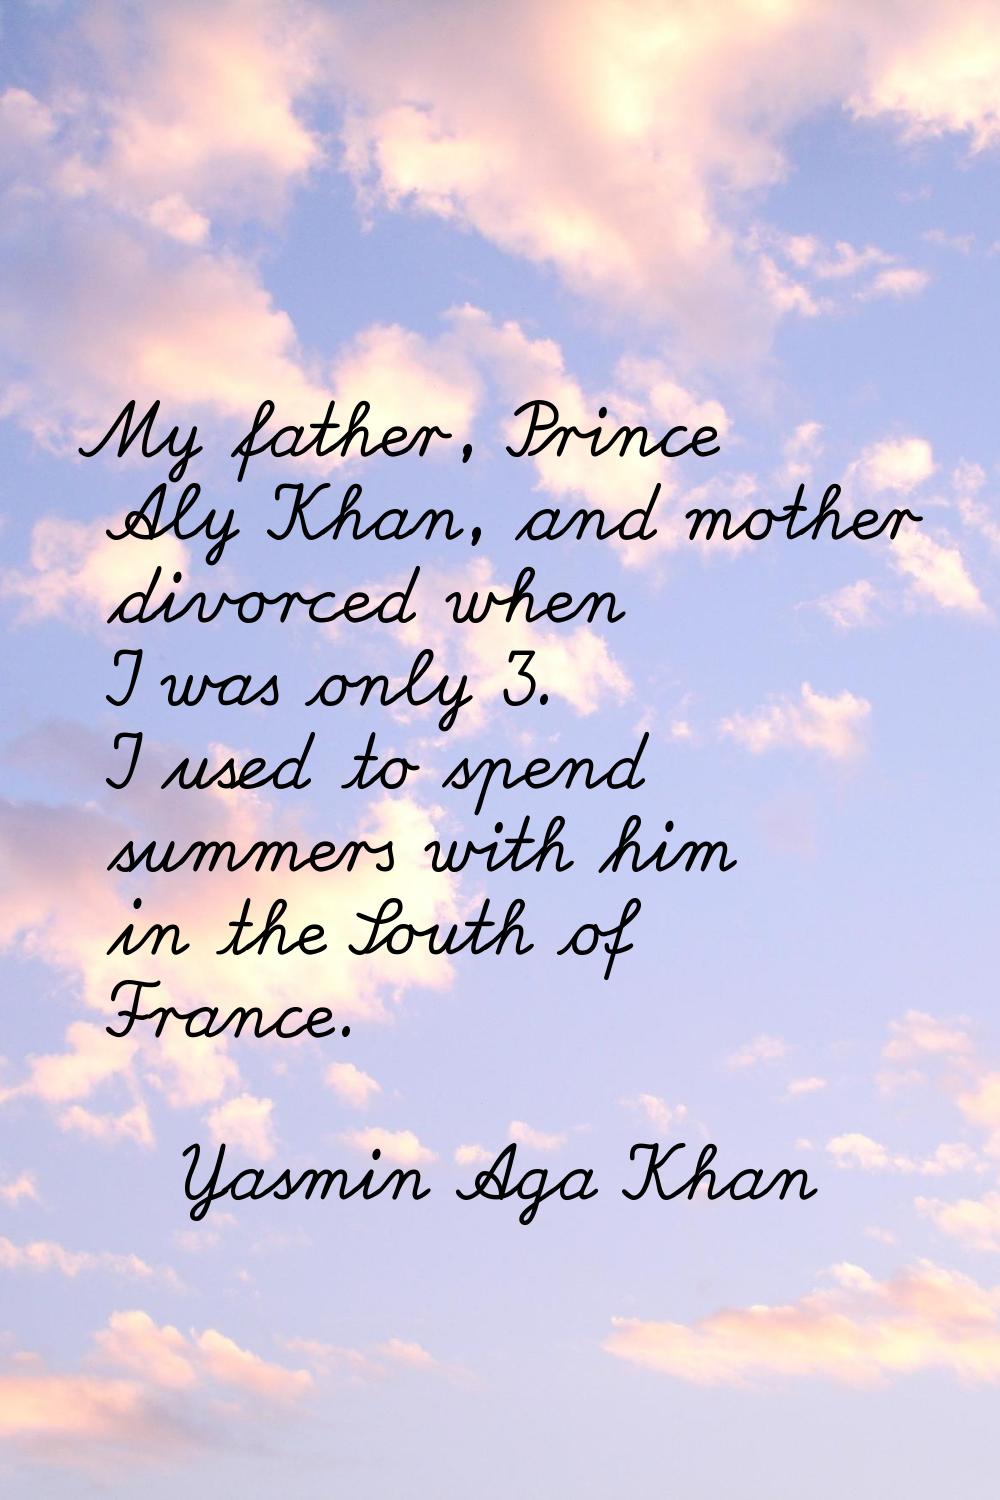 My father, Prince Aly Khan, and mother divorced when I was only 3. I used to spend summers with him